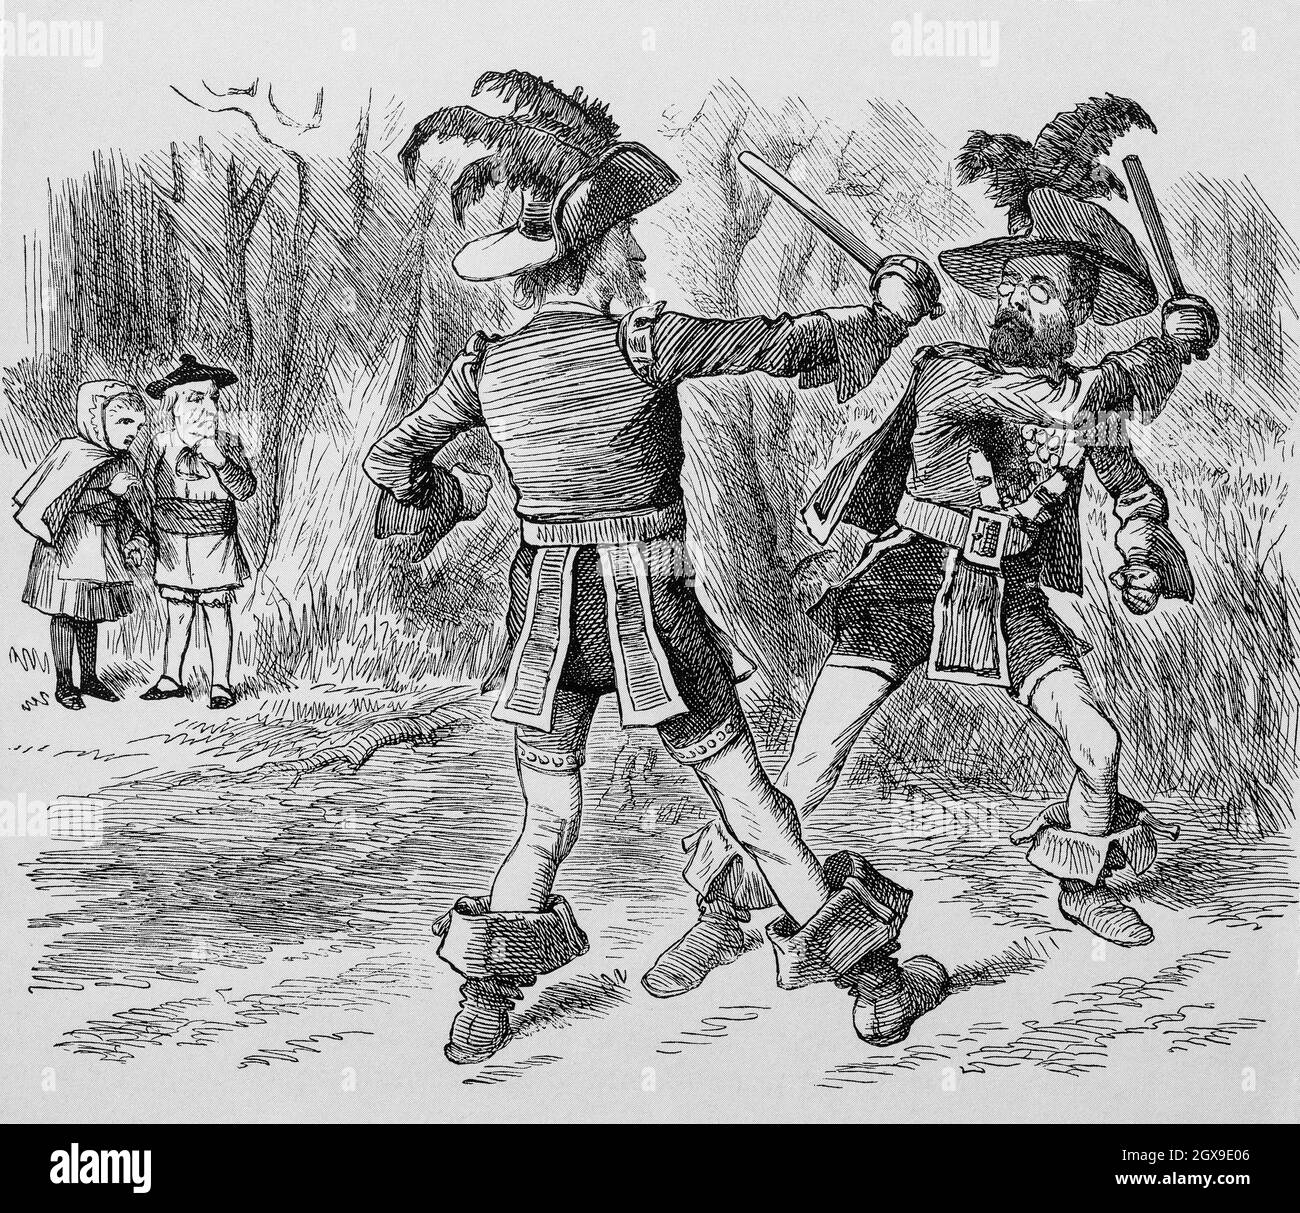 A Punch cartoon of duel featuring (left) Charles Stewart Parnell (1846-1891), an Irish nationalist politician who as a Member of Parliamentacted as Leader of the Home Rule League from 1880 to 1882 and then Leader of the Irish Parliamentary Party from 1882 to 1891. His party held the balance of power in the House of Commons during the Home Rule debates of 1885–1886. Right is Tim Healy, also an Irish nationalist politician, who initially a passionate supporter of Parnell, he became disenchanted with his leader after events surrounding Parnell's relationship with Katharine O'Shea. Stock Photo